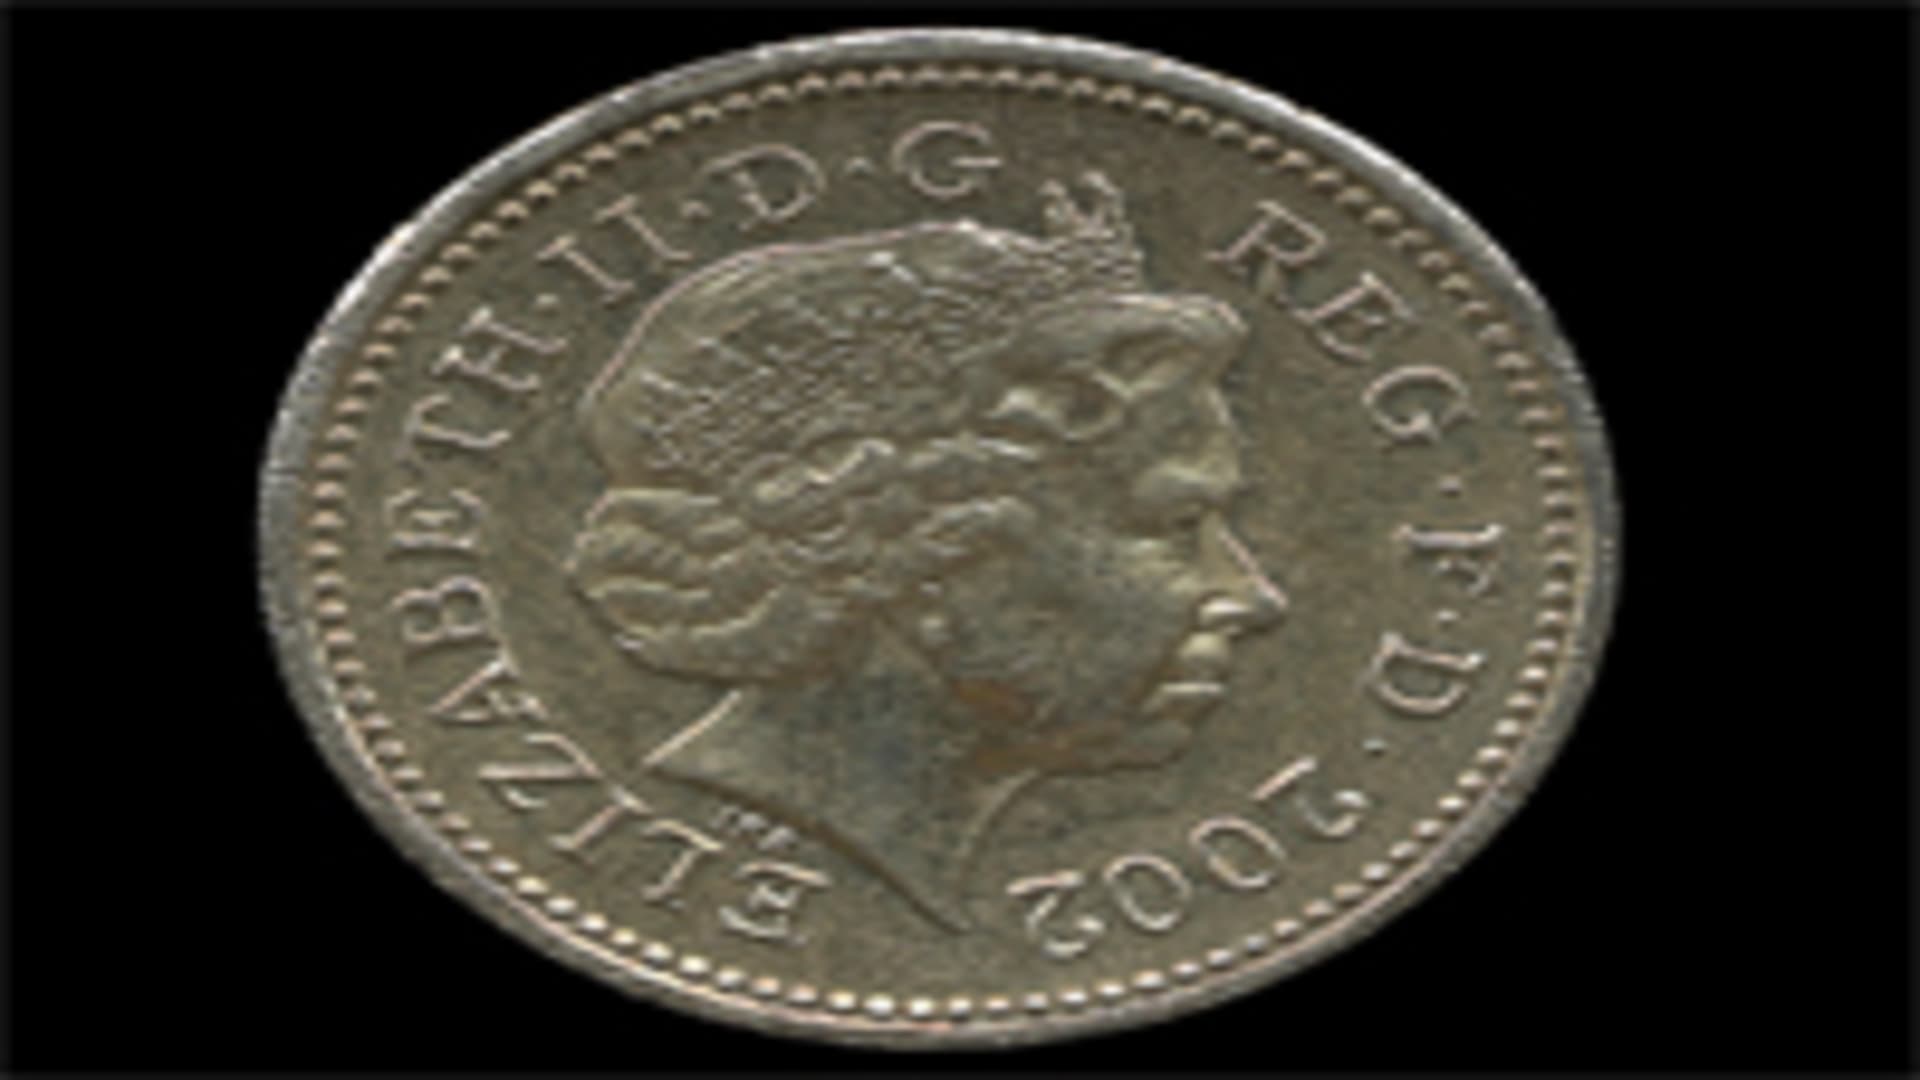 UK History, One Pound Coin at a Time